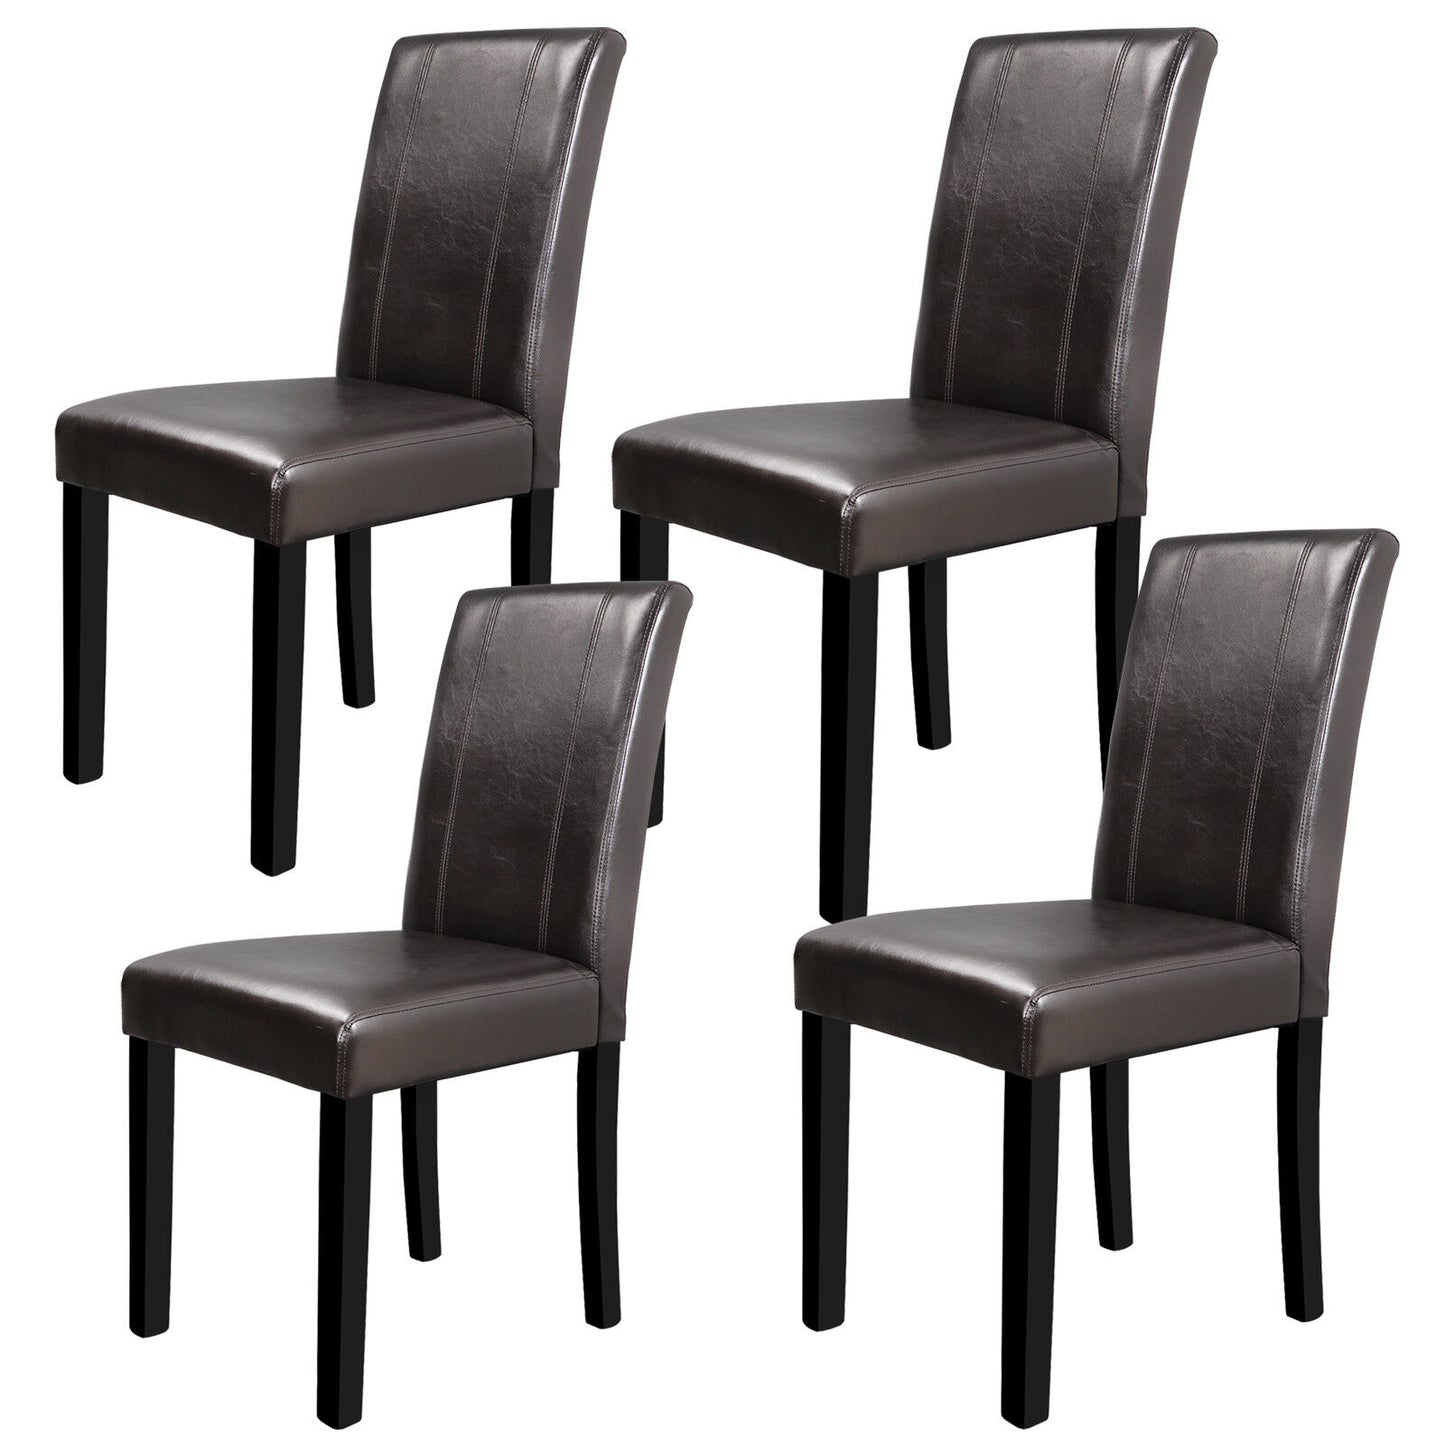 Parson Brown Dining Chair 4 Pieces Blended Leatherette Solid Wood Construction